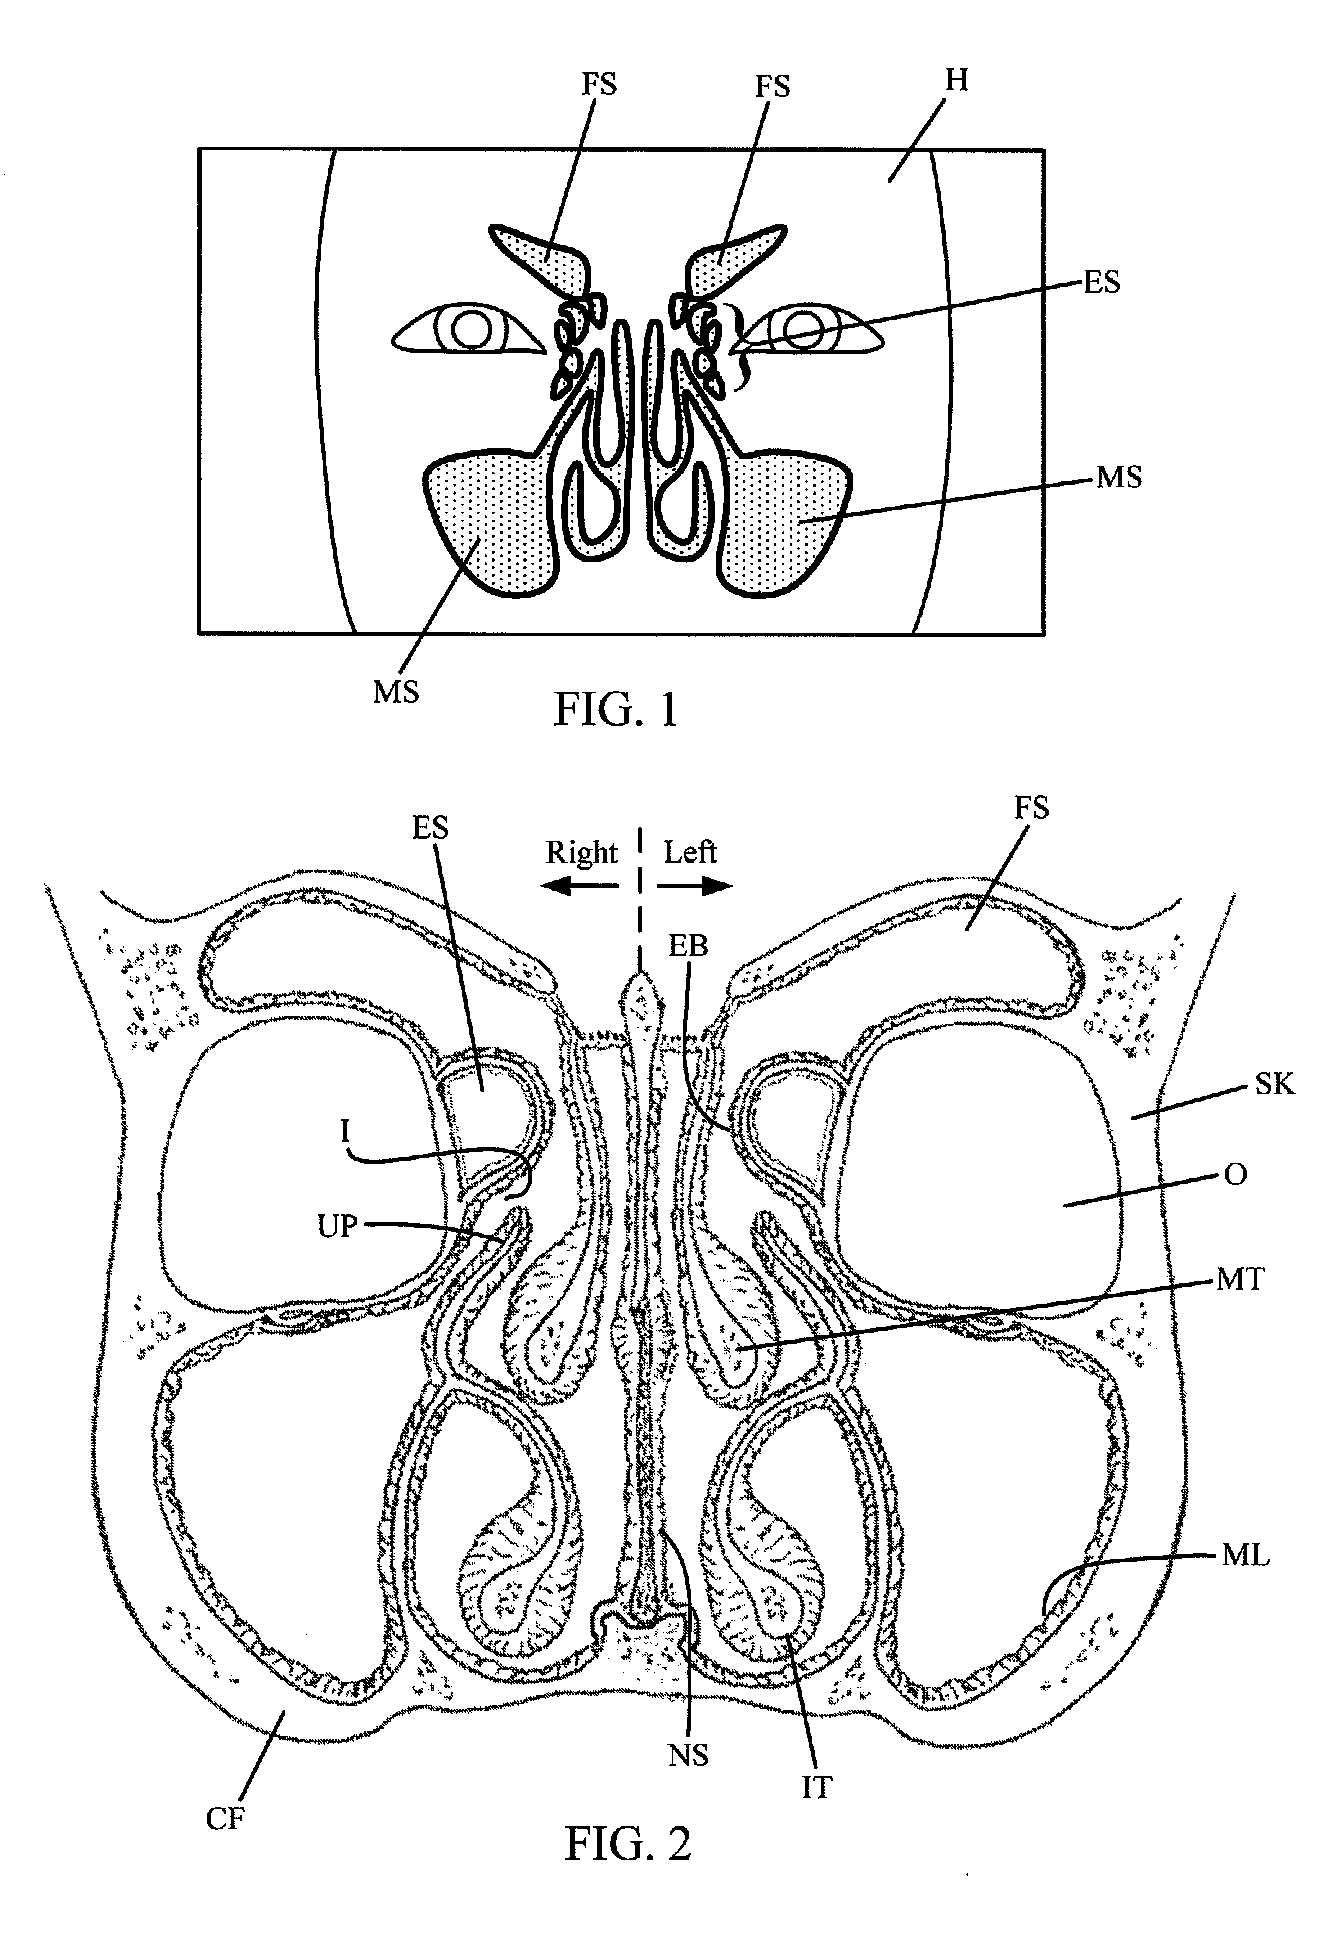 Device and method for treatment of sinusitus